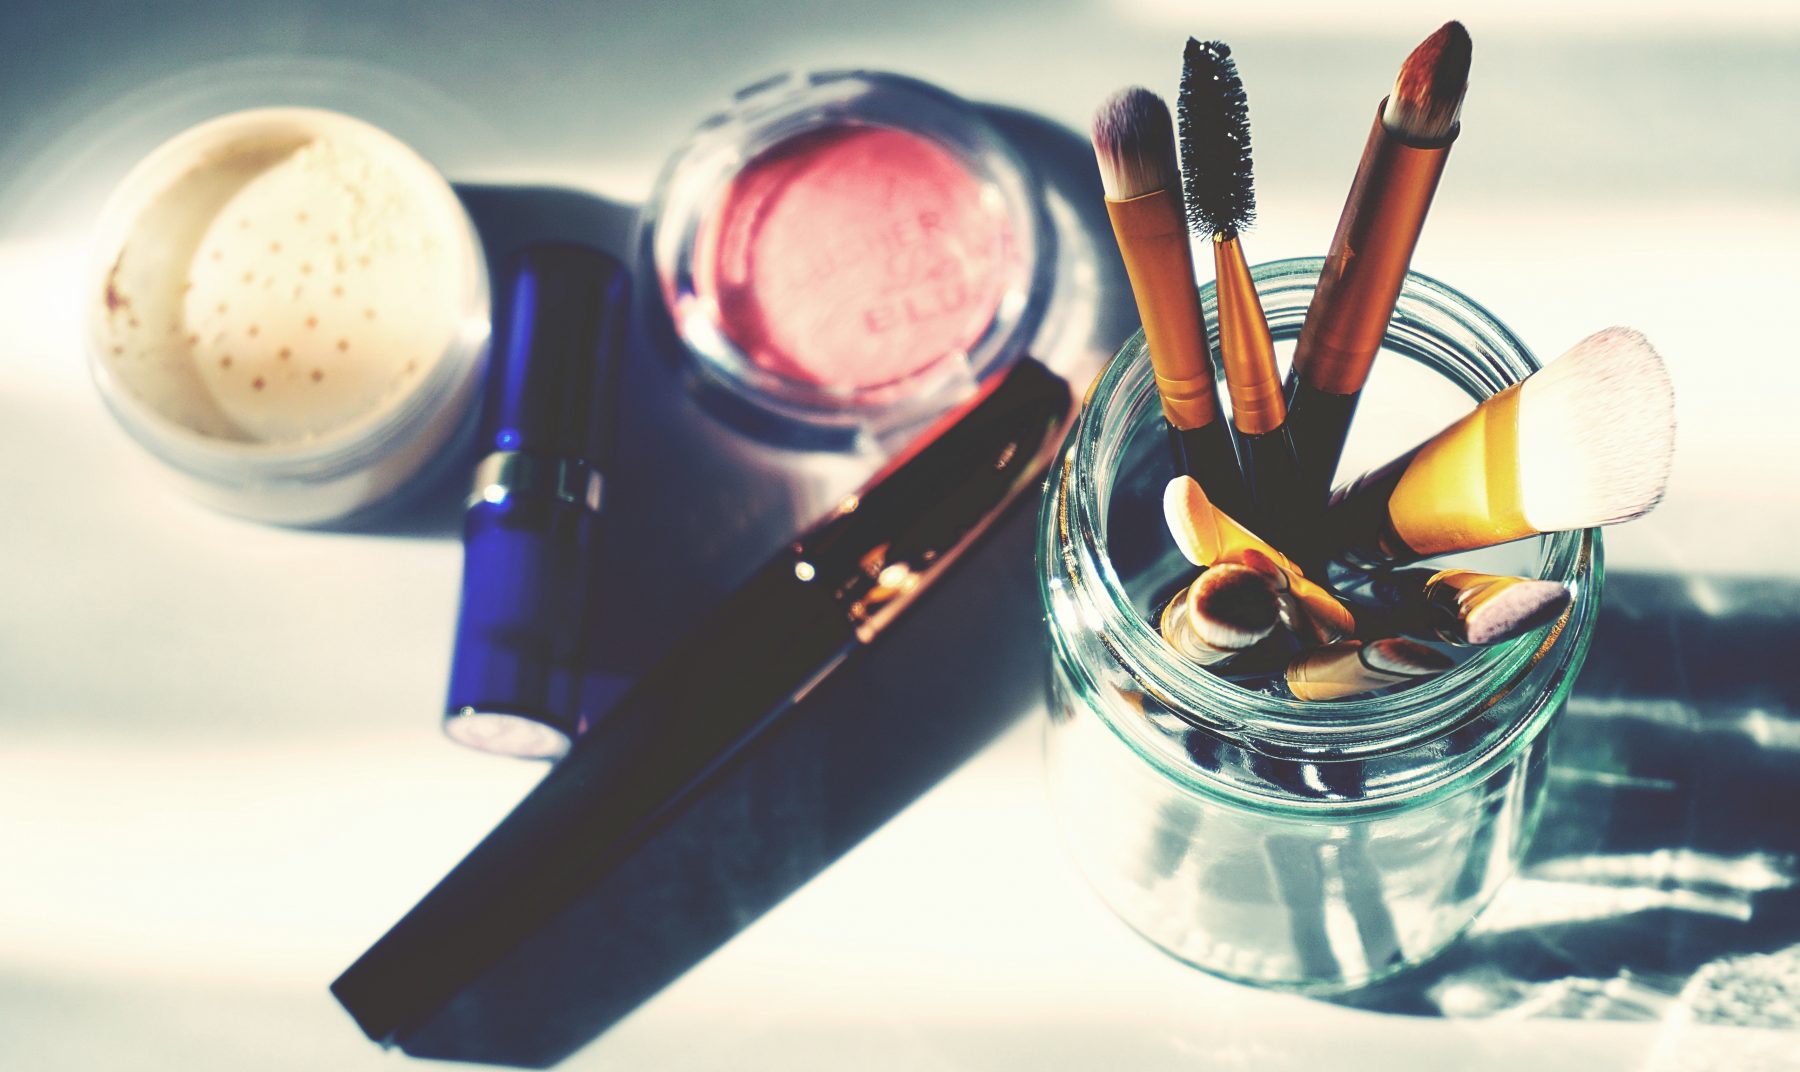 Cosmetics Conferences Come to NYC